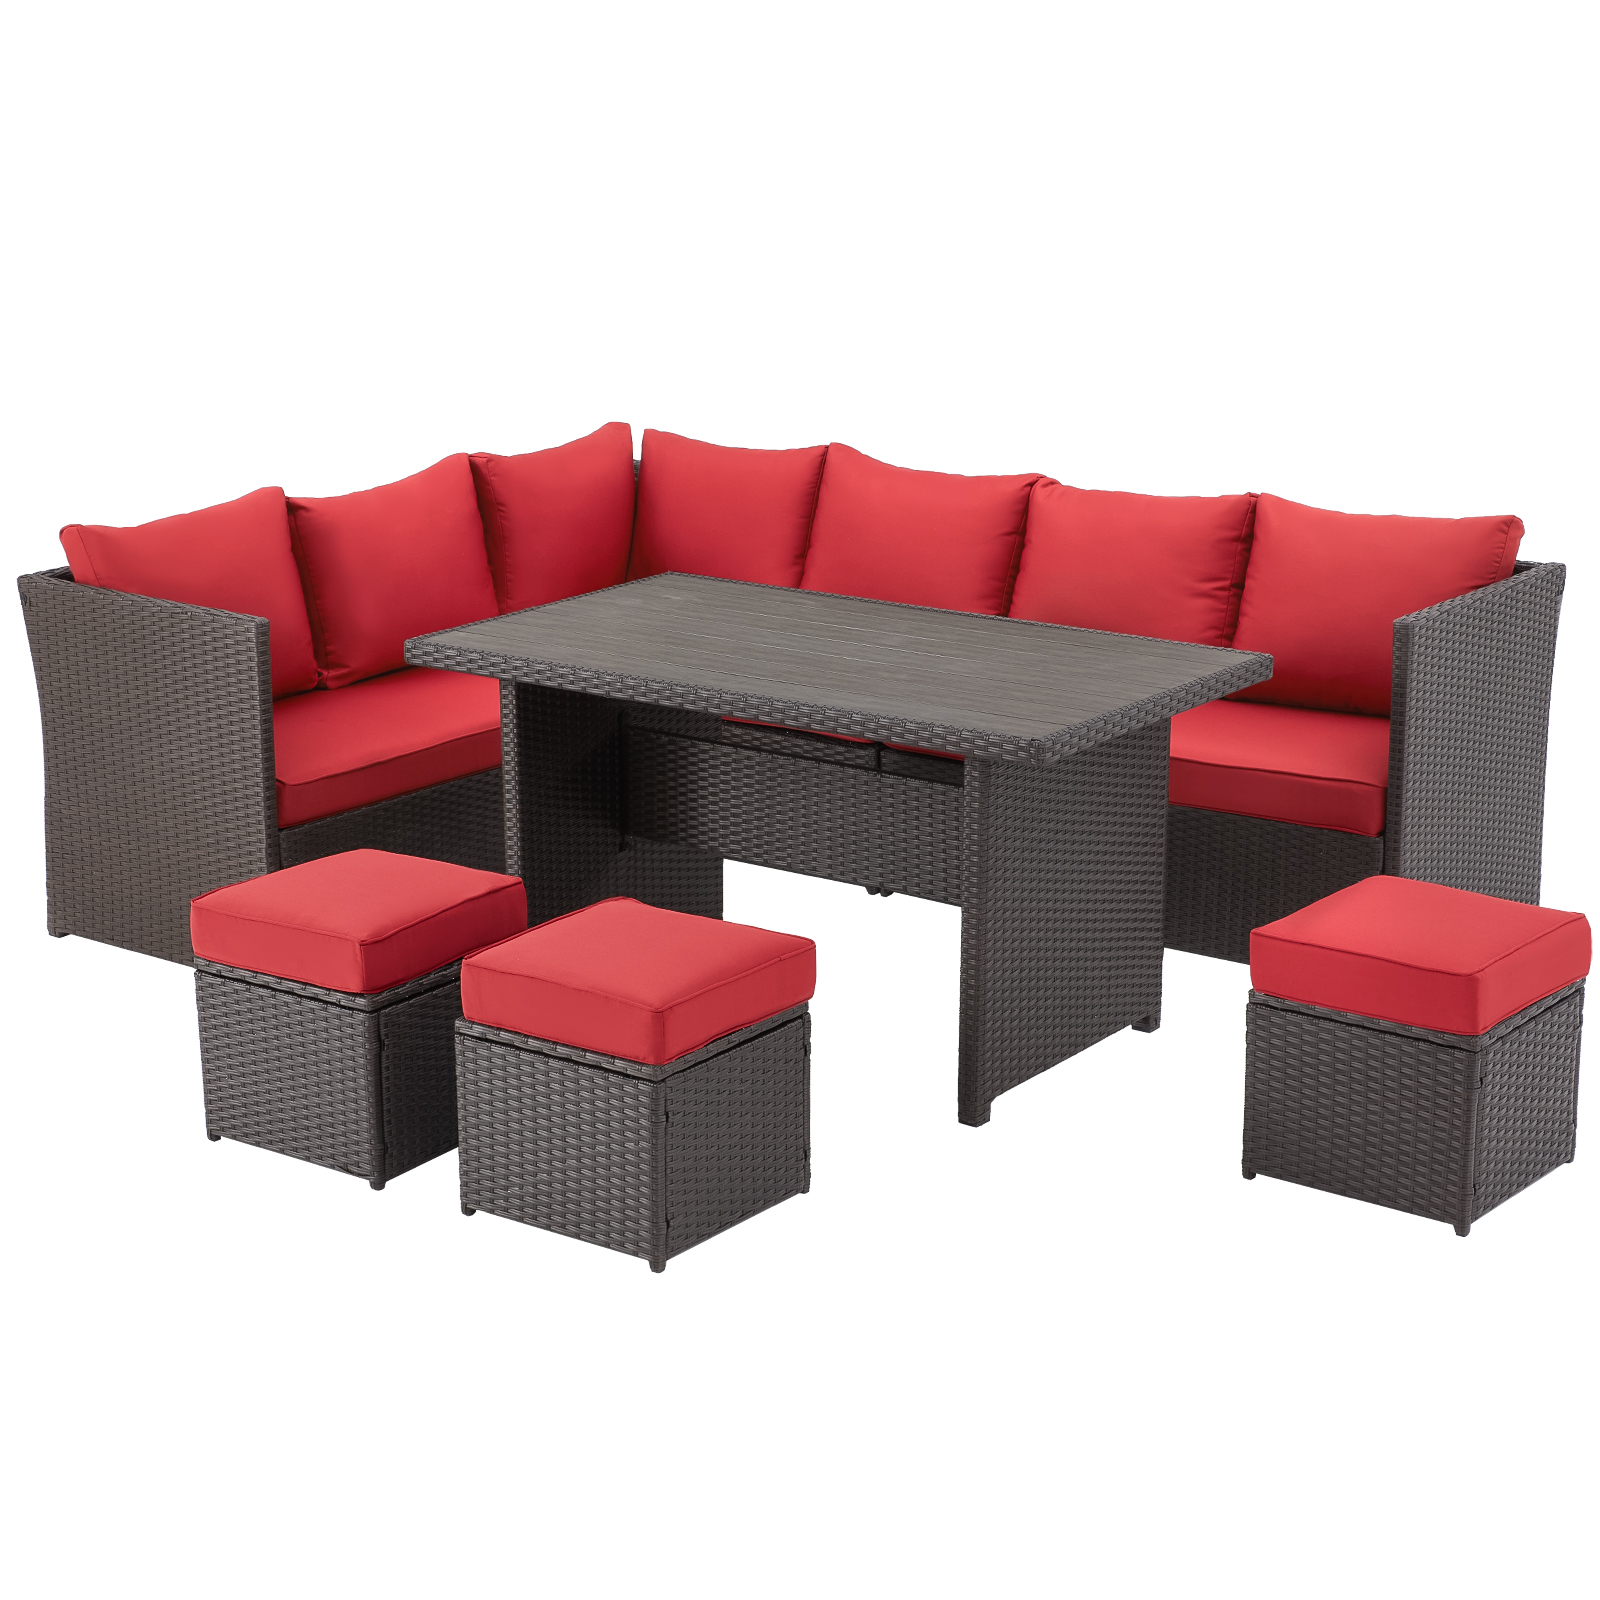 AECOJOY 7 Piece Patio Conversation Set, Outdoor Sectional Sofa Rattan Wicker Dining Furniture, Red - image 3 of 9